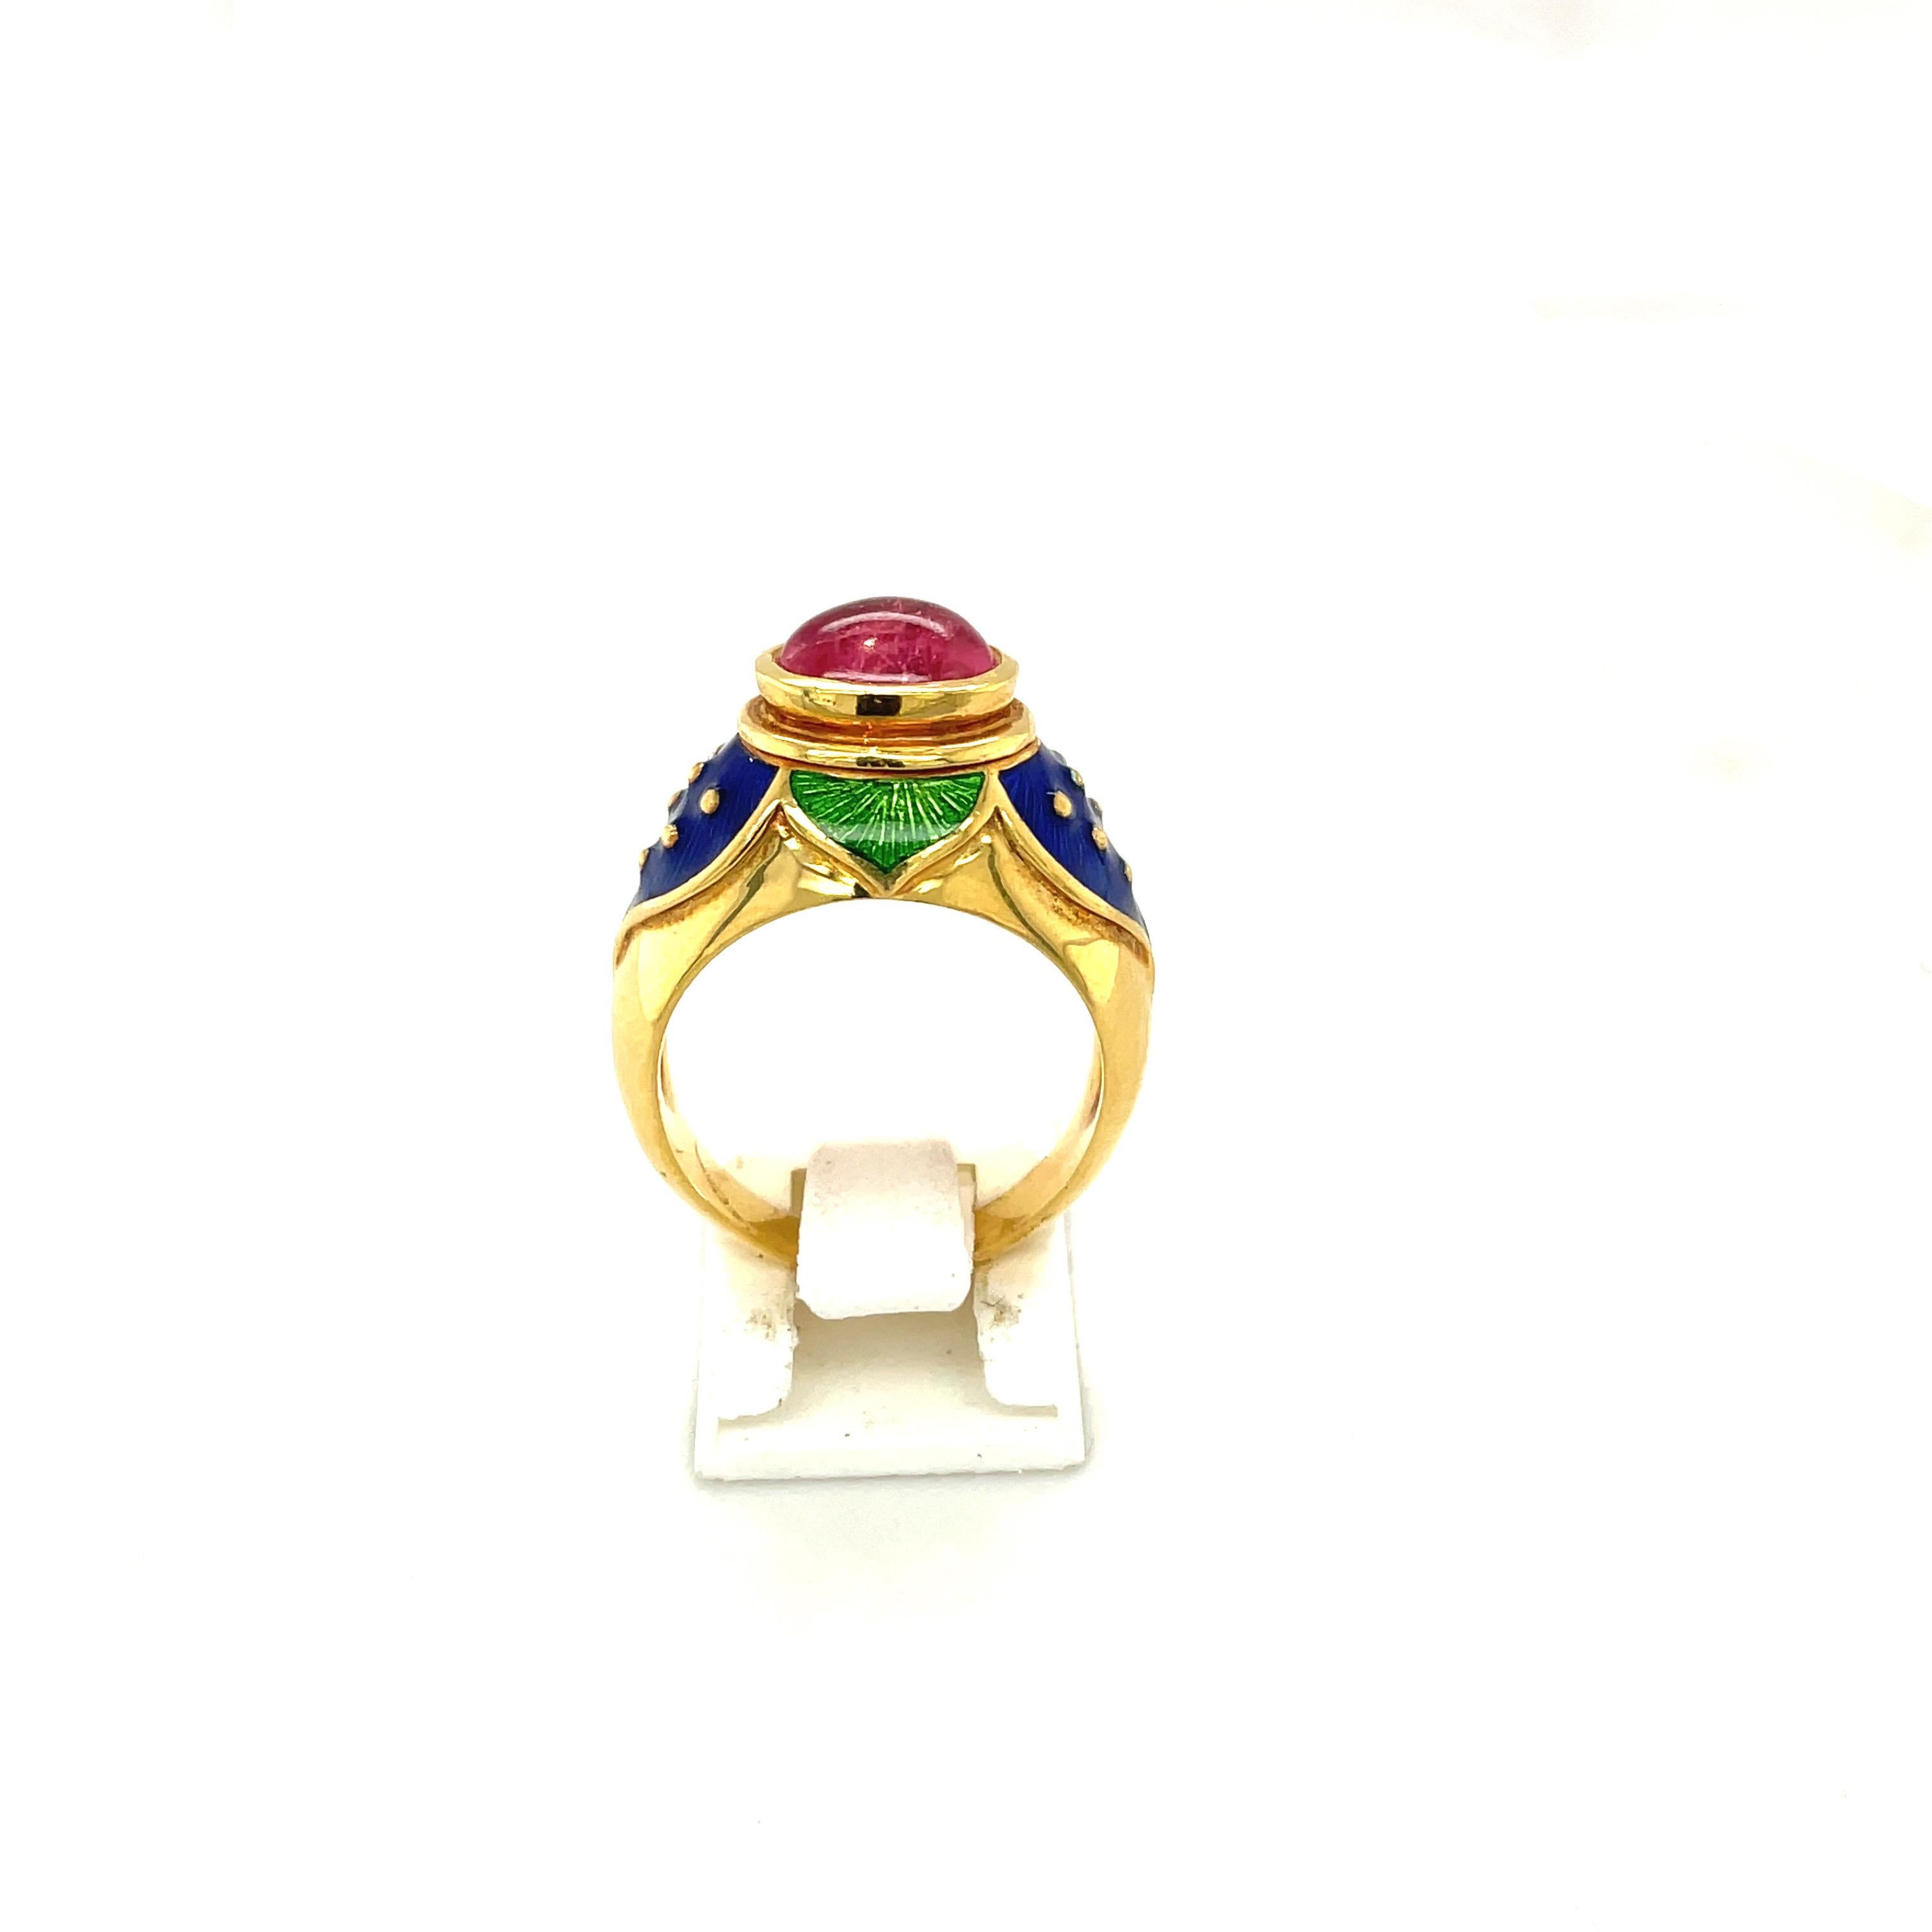 Cellini 18KT YG Ring with Cabochon Pink Tourmaline Center & Blue & Green Enamel For Sale 3